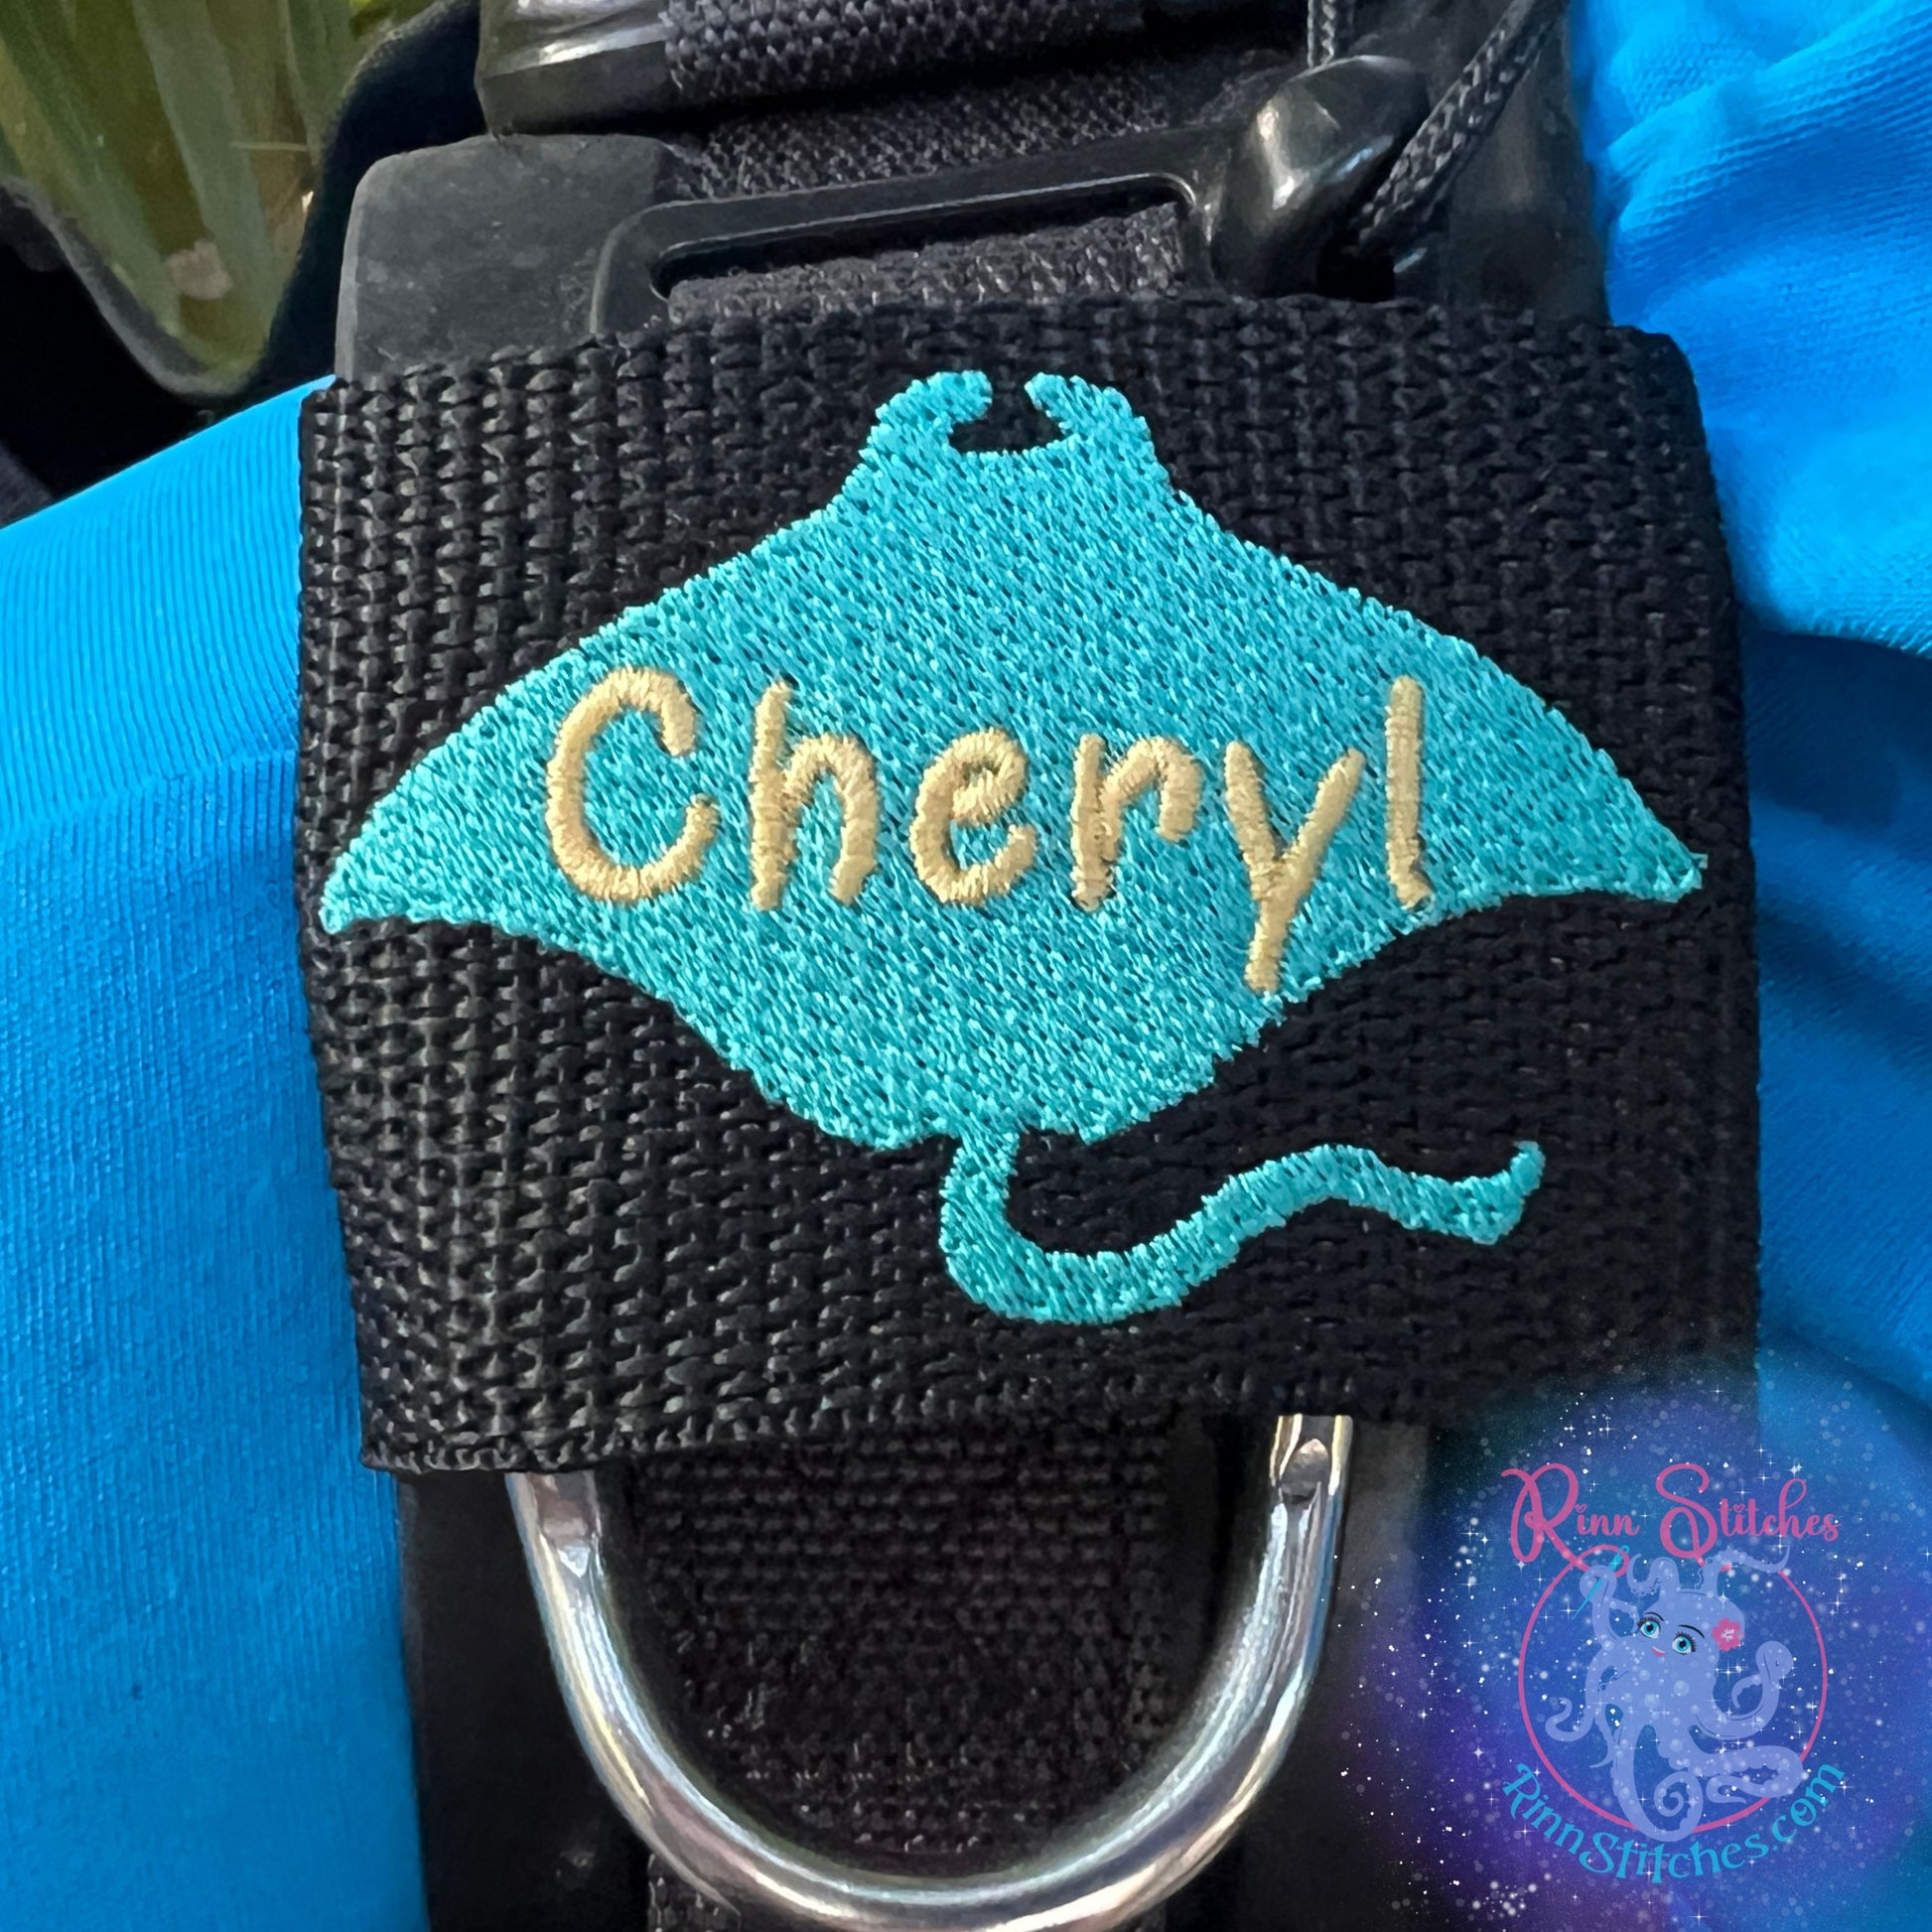 Manta Ray Silhouette Personalized BCD Tag by Rinn Stitches on Maui, Hawaii on a Scuba Pro Hydros BCD